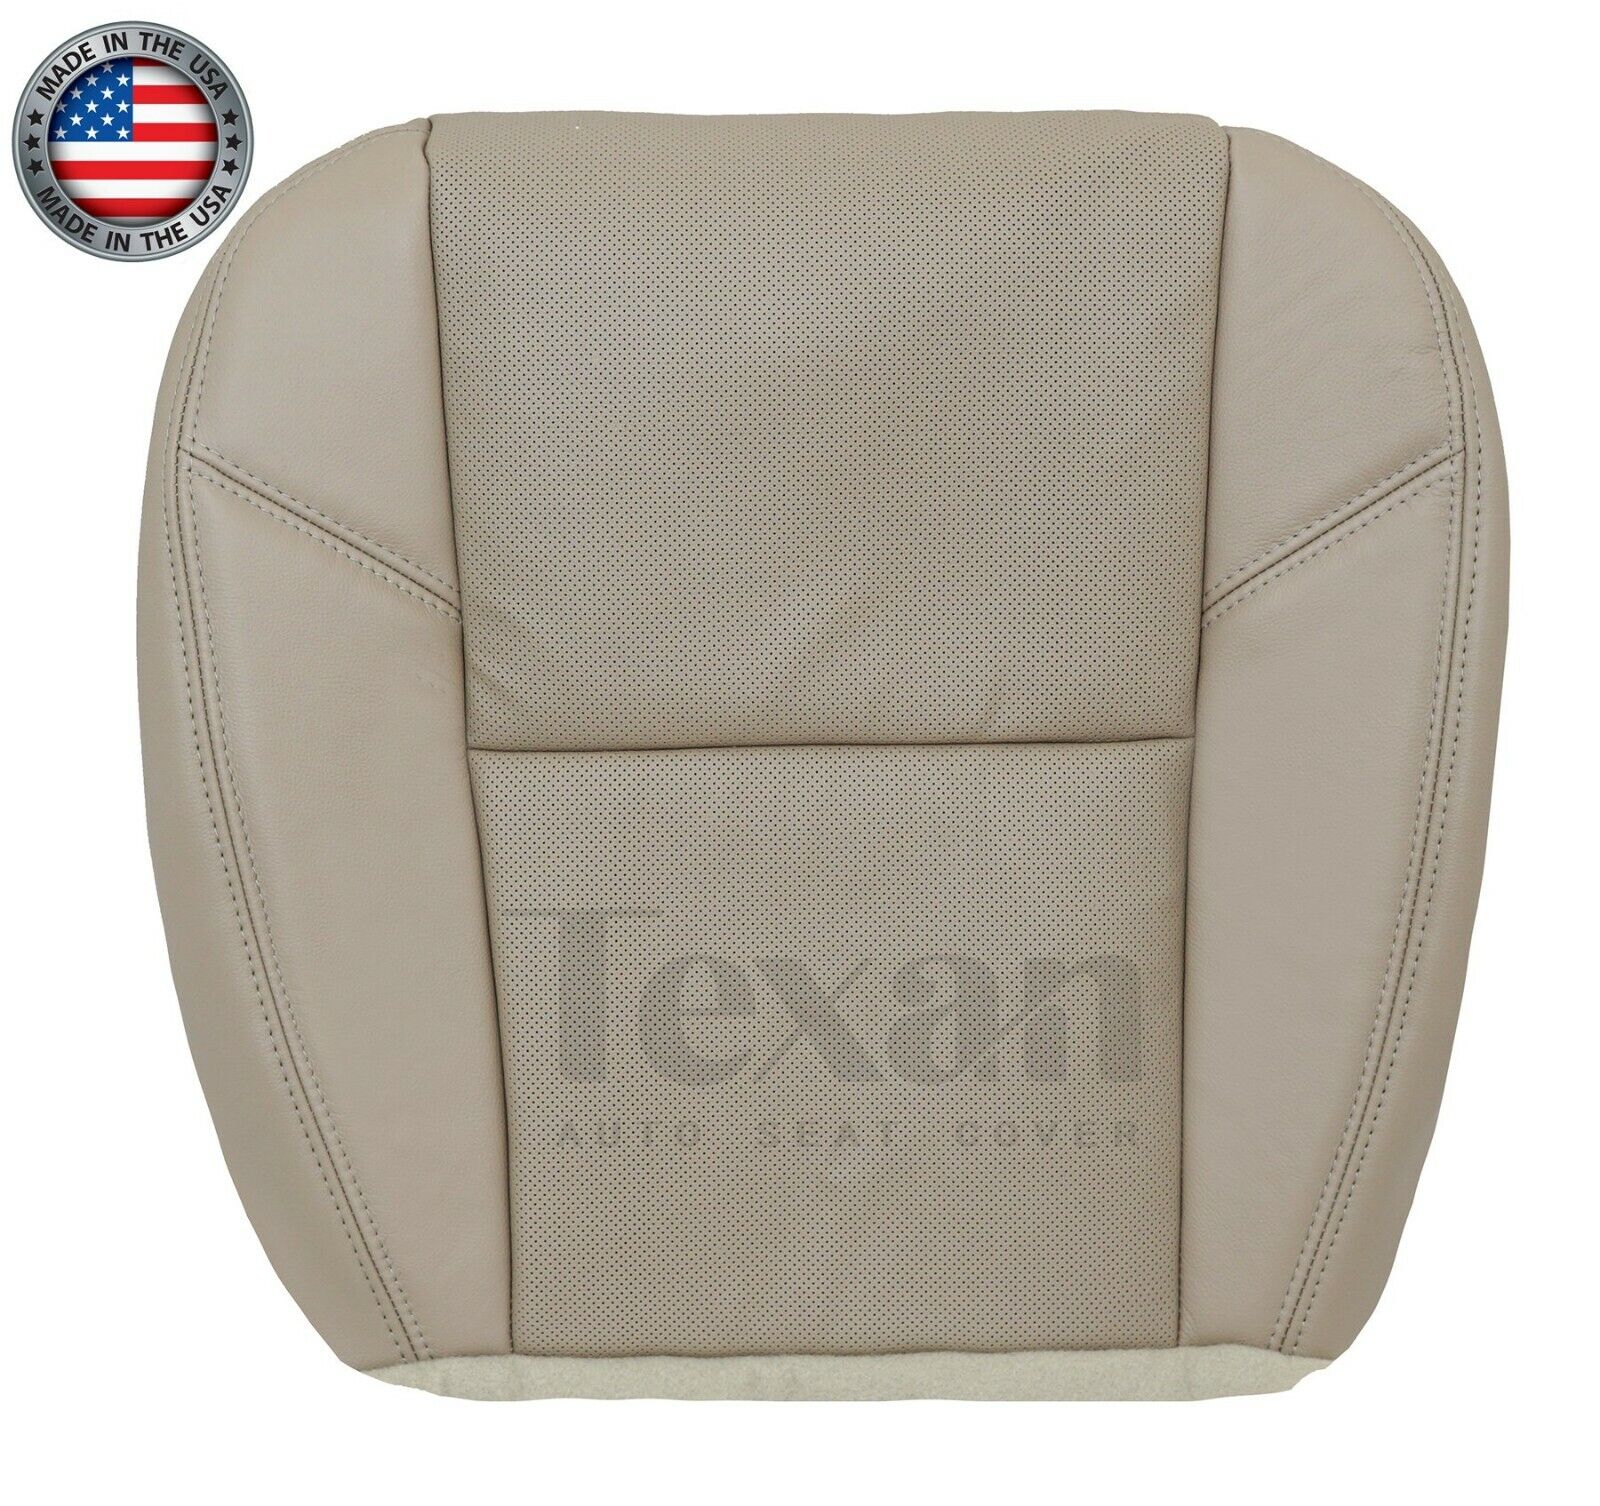 Fits 2009, 2010, 2011, 2012, 2013, 2014 GMC Sierra Denali SLT, SLE Driver Side Bottom Perforated Leather Replacement Seat Cover Tan